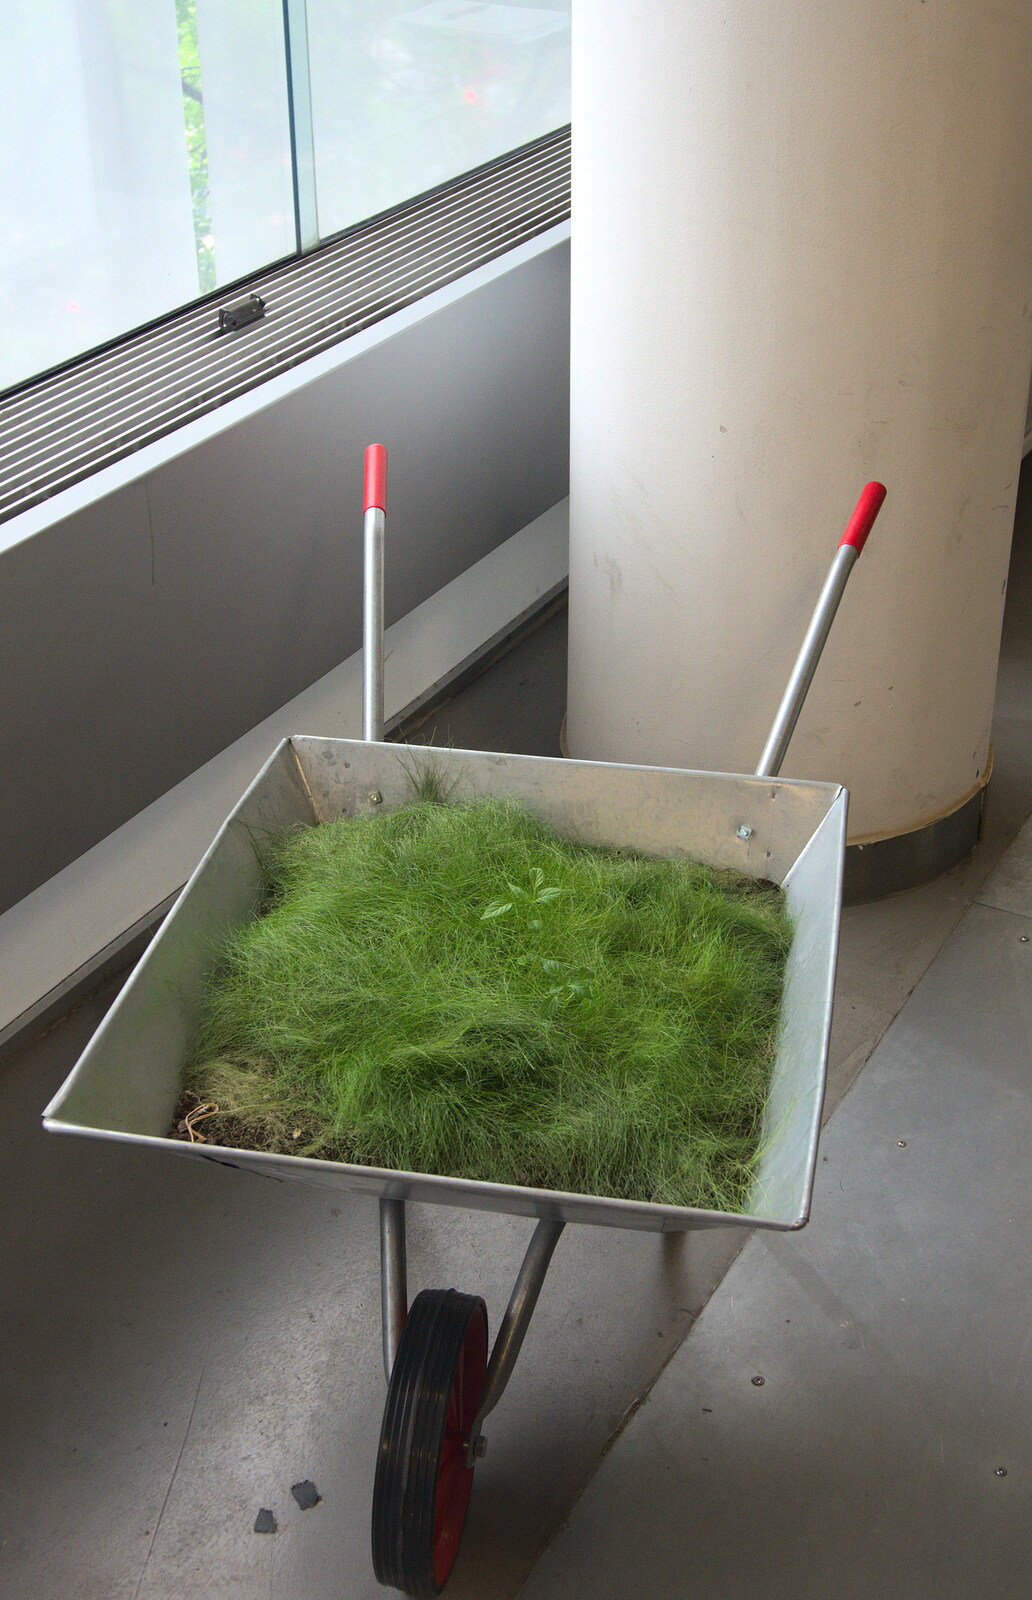 A bizarre prop: fake grass in a wheelbarrow from A SwiftKey Hack Day, Westminster, London - 31st May 2013